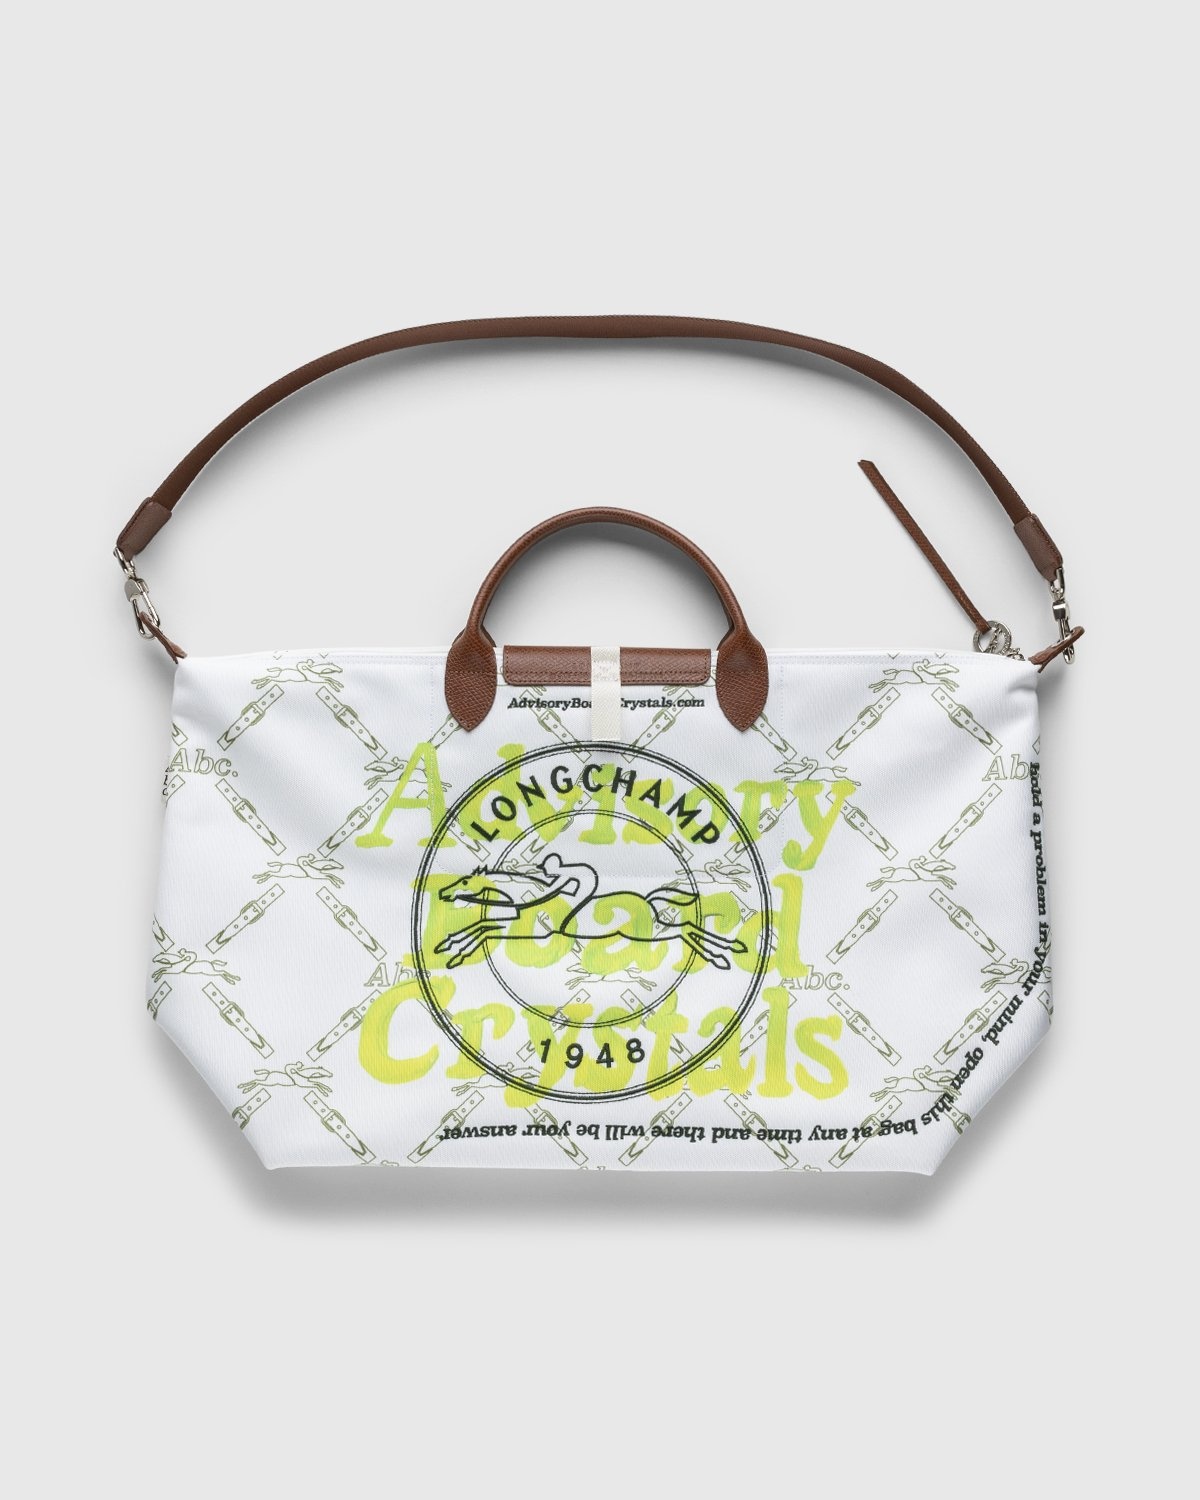 Longchamp Pliage Tote Bag with Japan Limited Edition Illustration